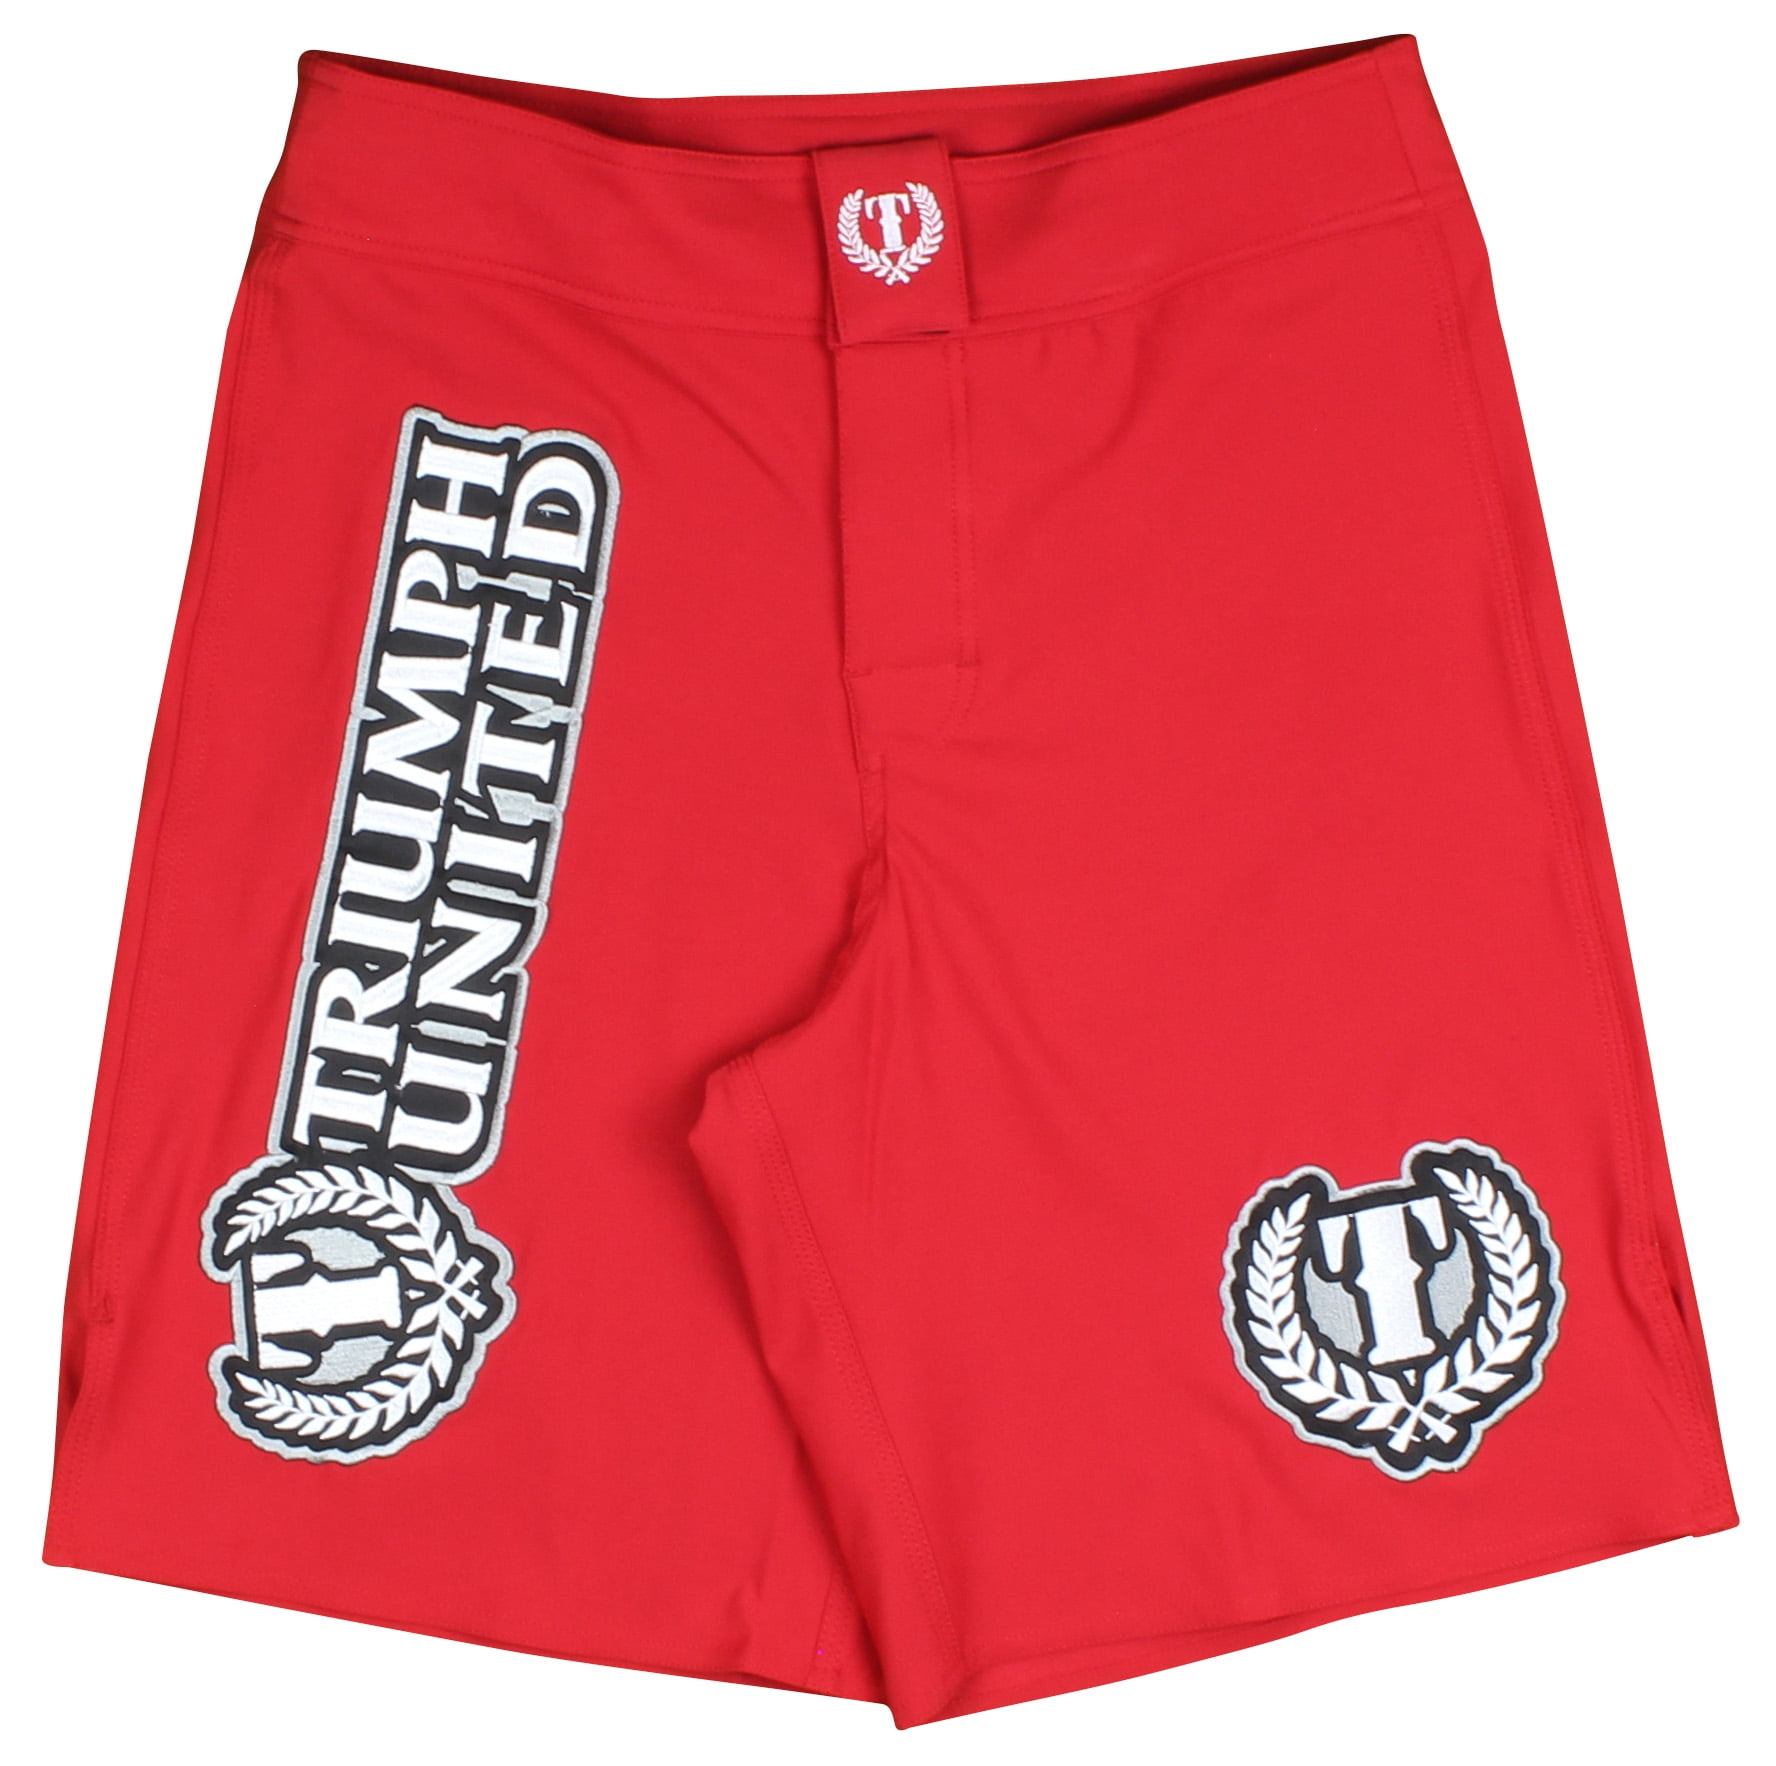 Saber Shorts Red - Triumph Fight United Mens